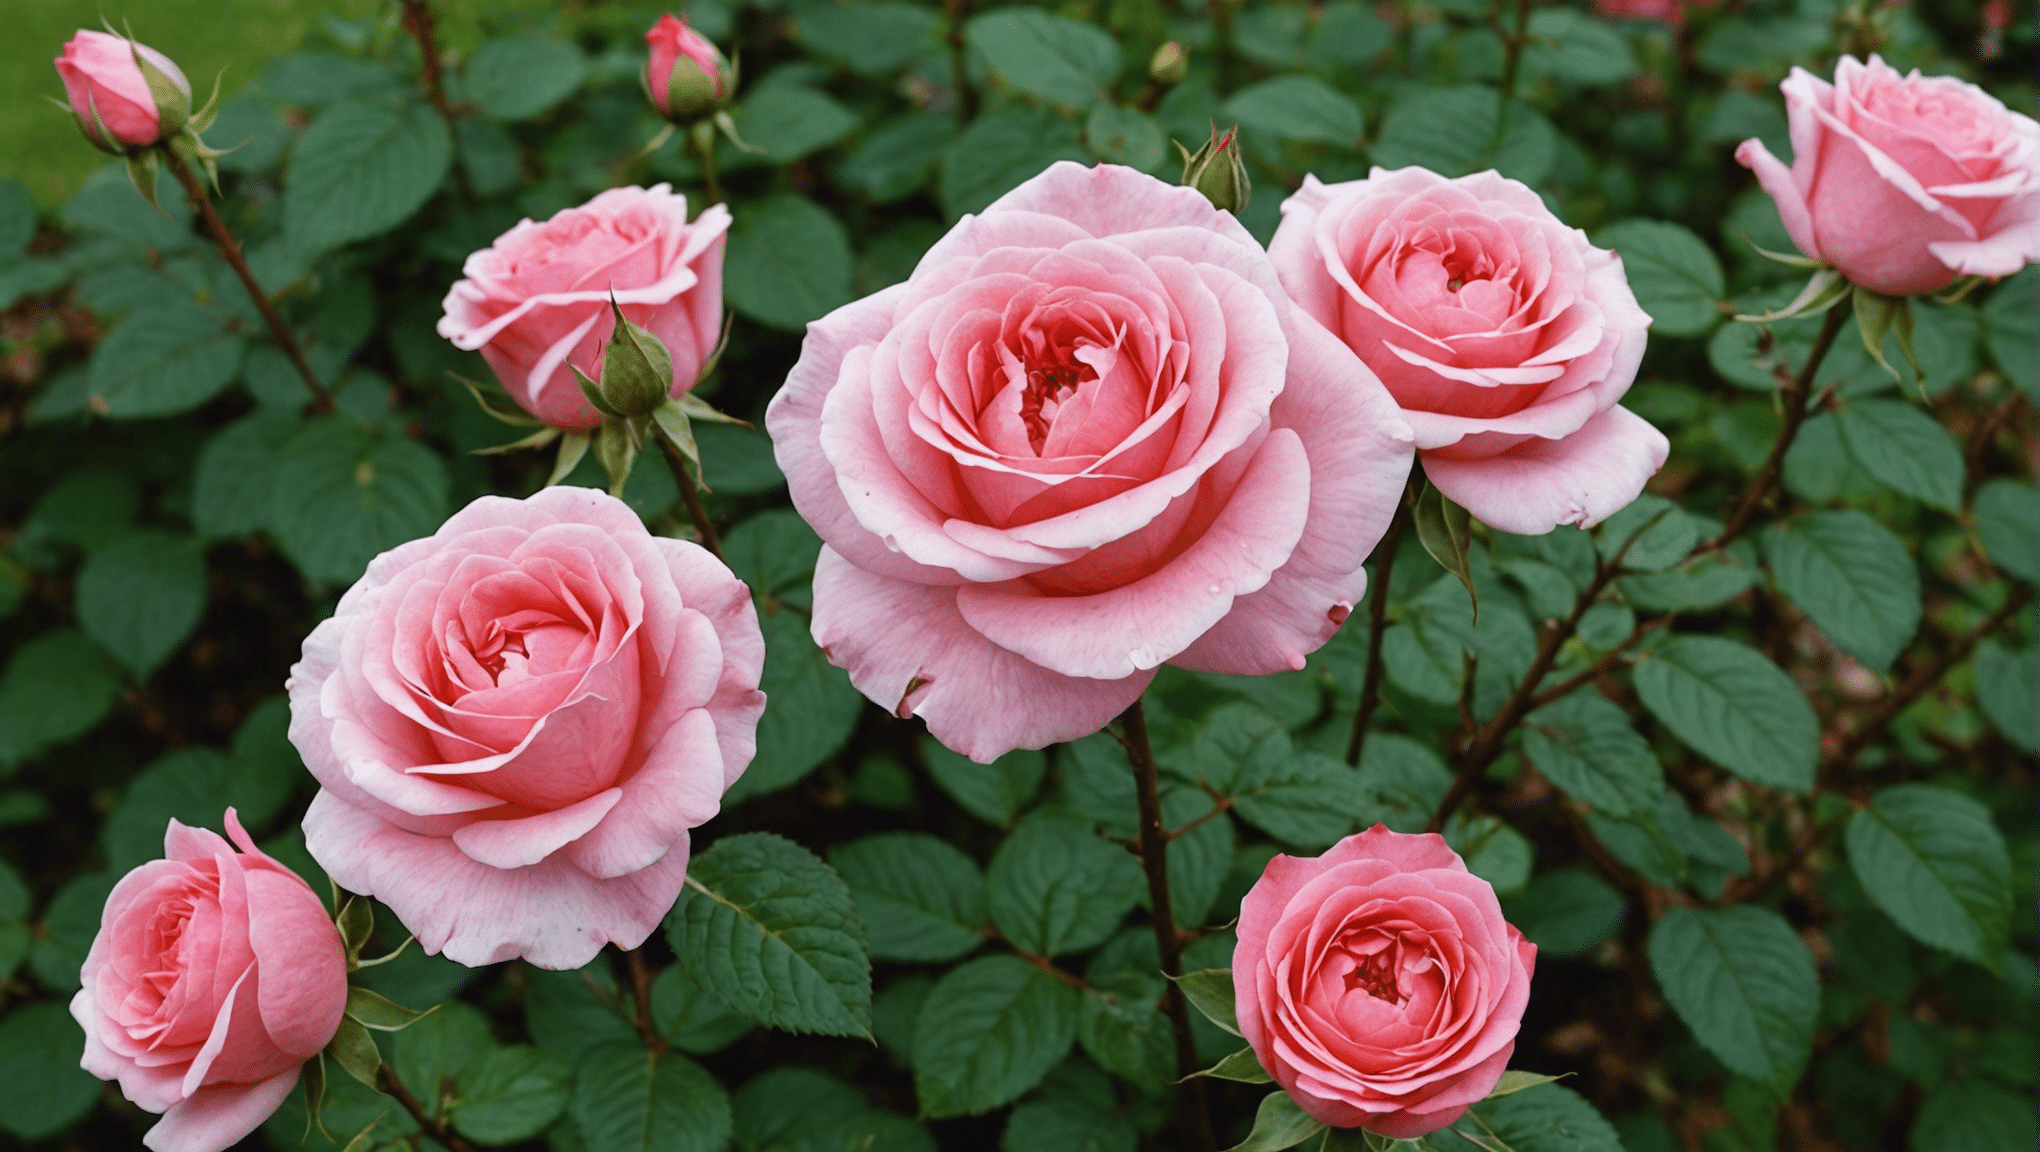 find out how easy it is to grow rose seeds with helpful tips and advice. discover the best methods for growing beautiful roses from seeds.